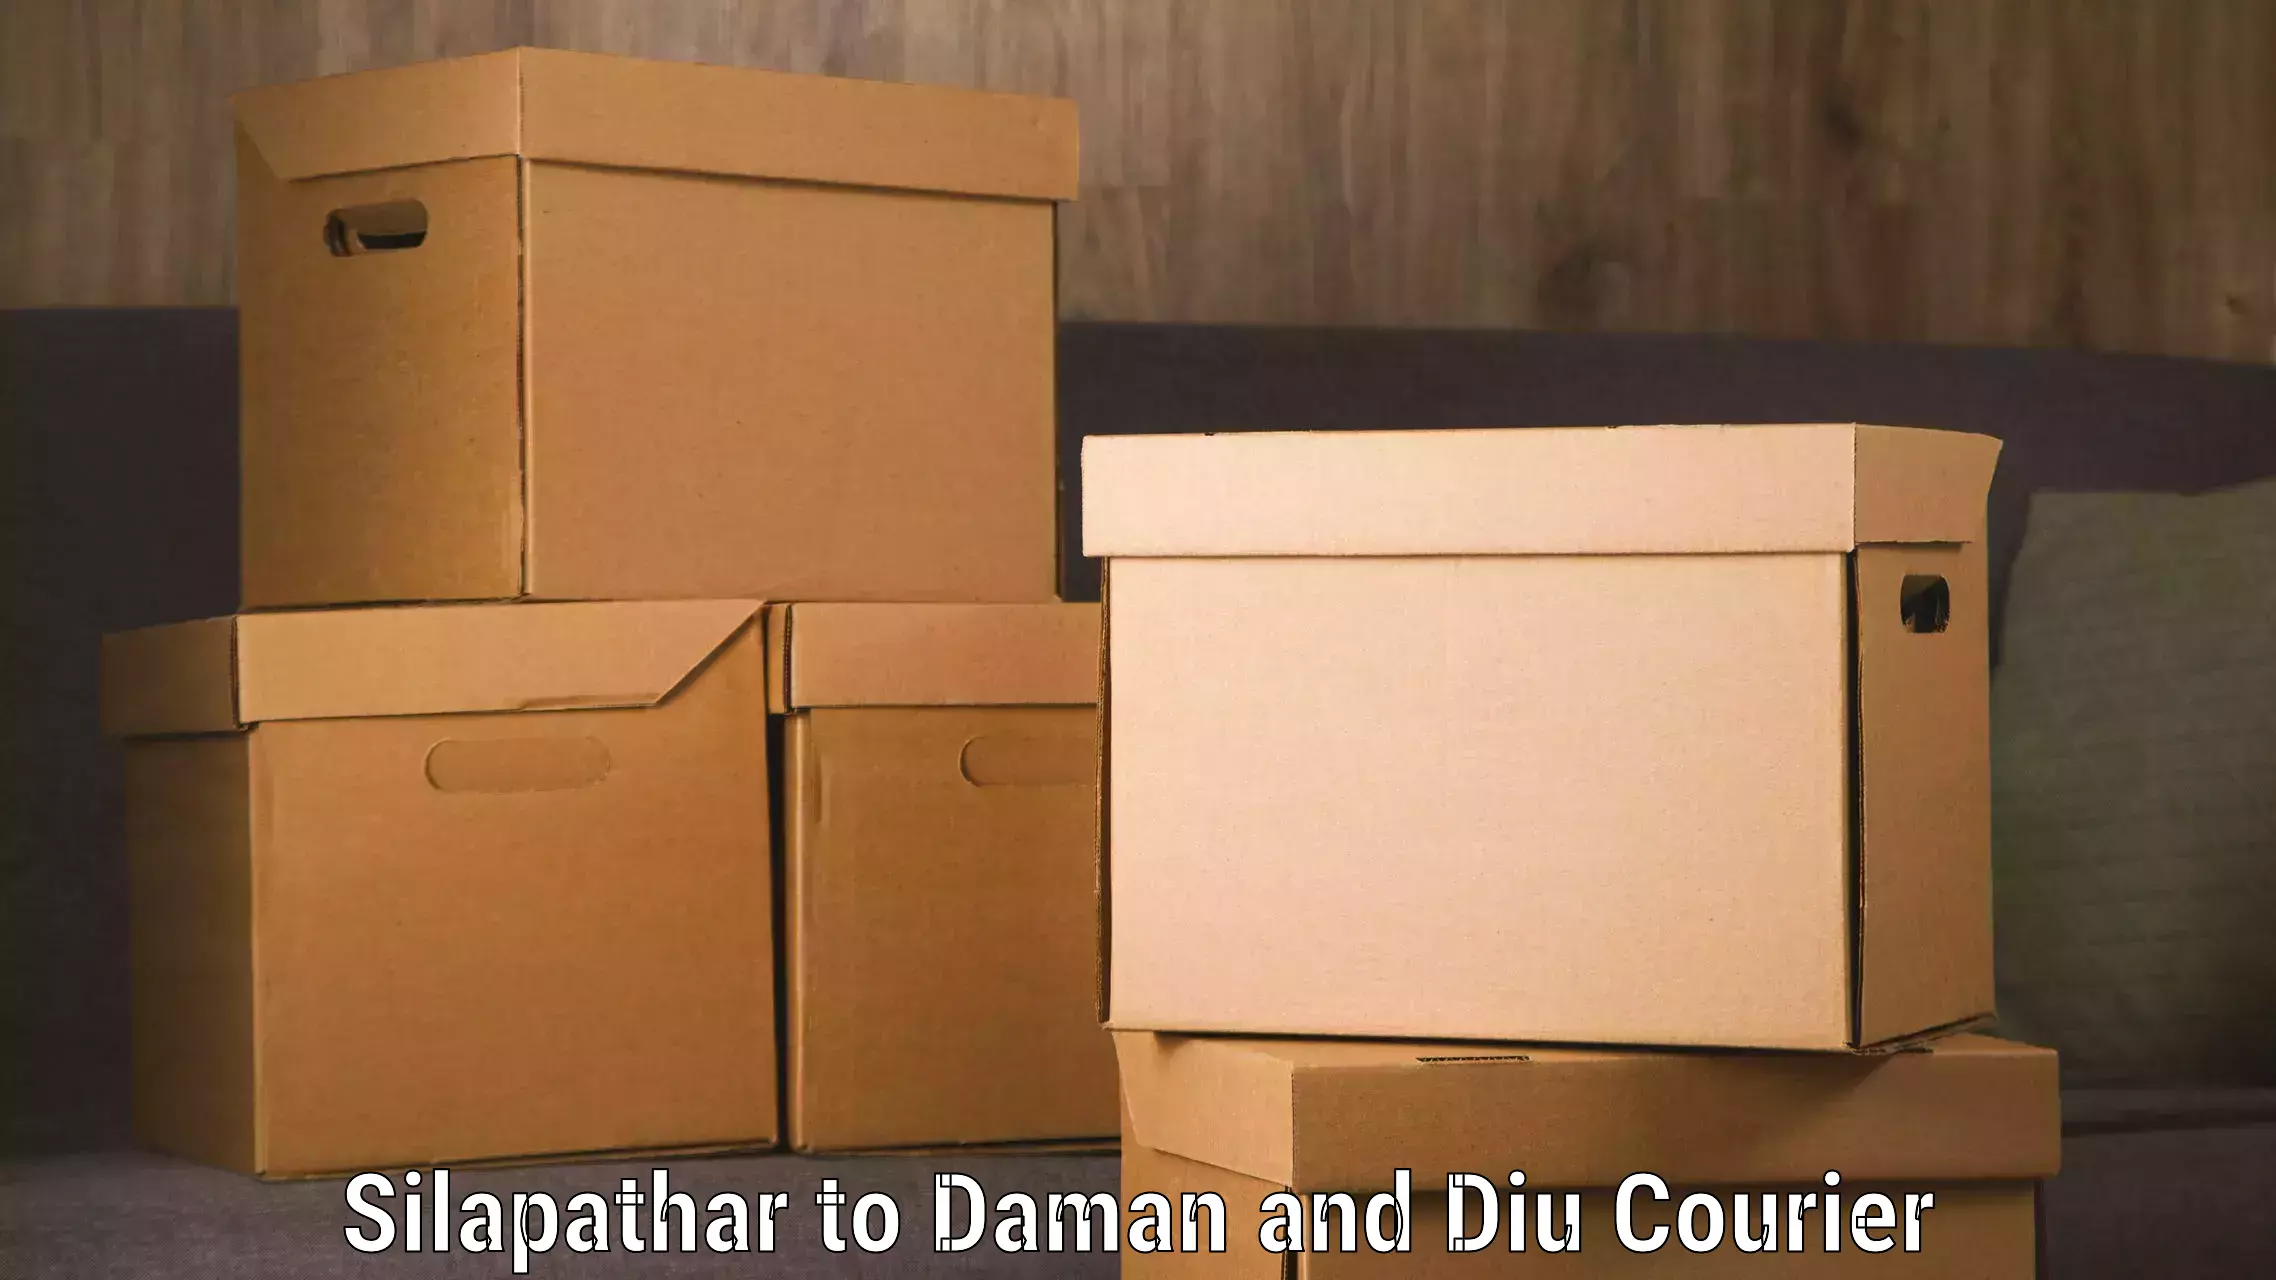 Luggage transport consultancy Silapathar to Daman